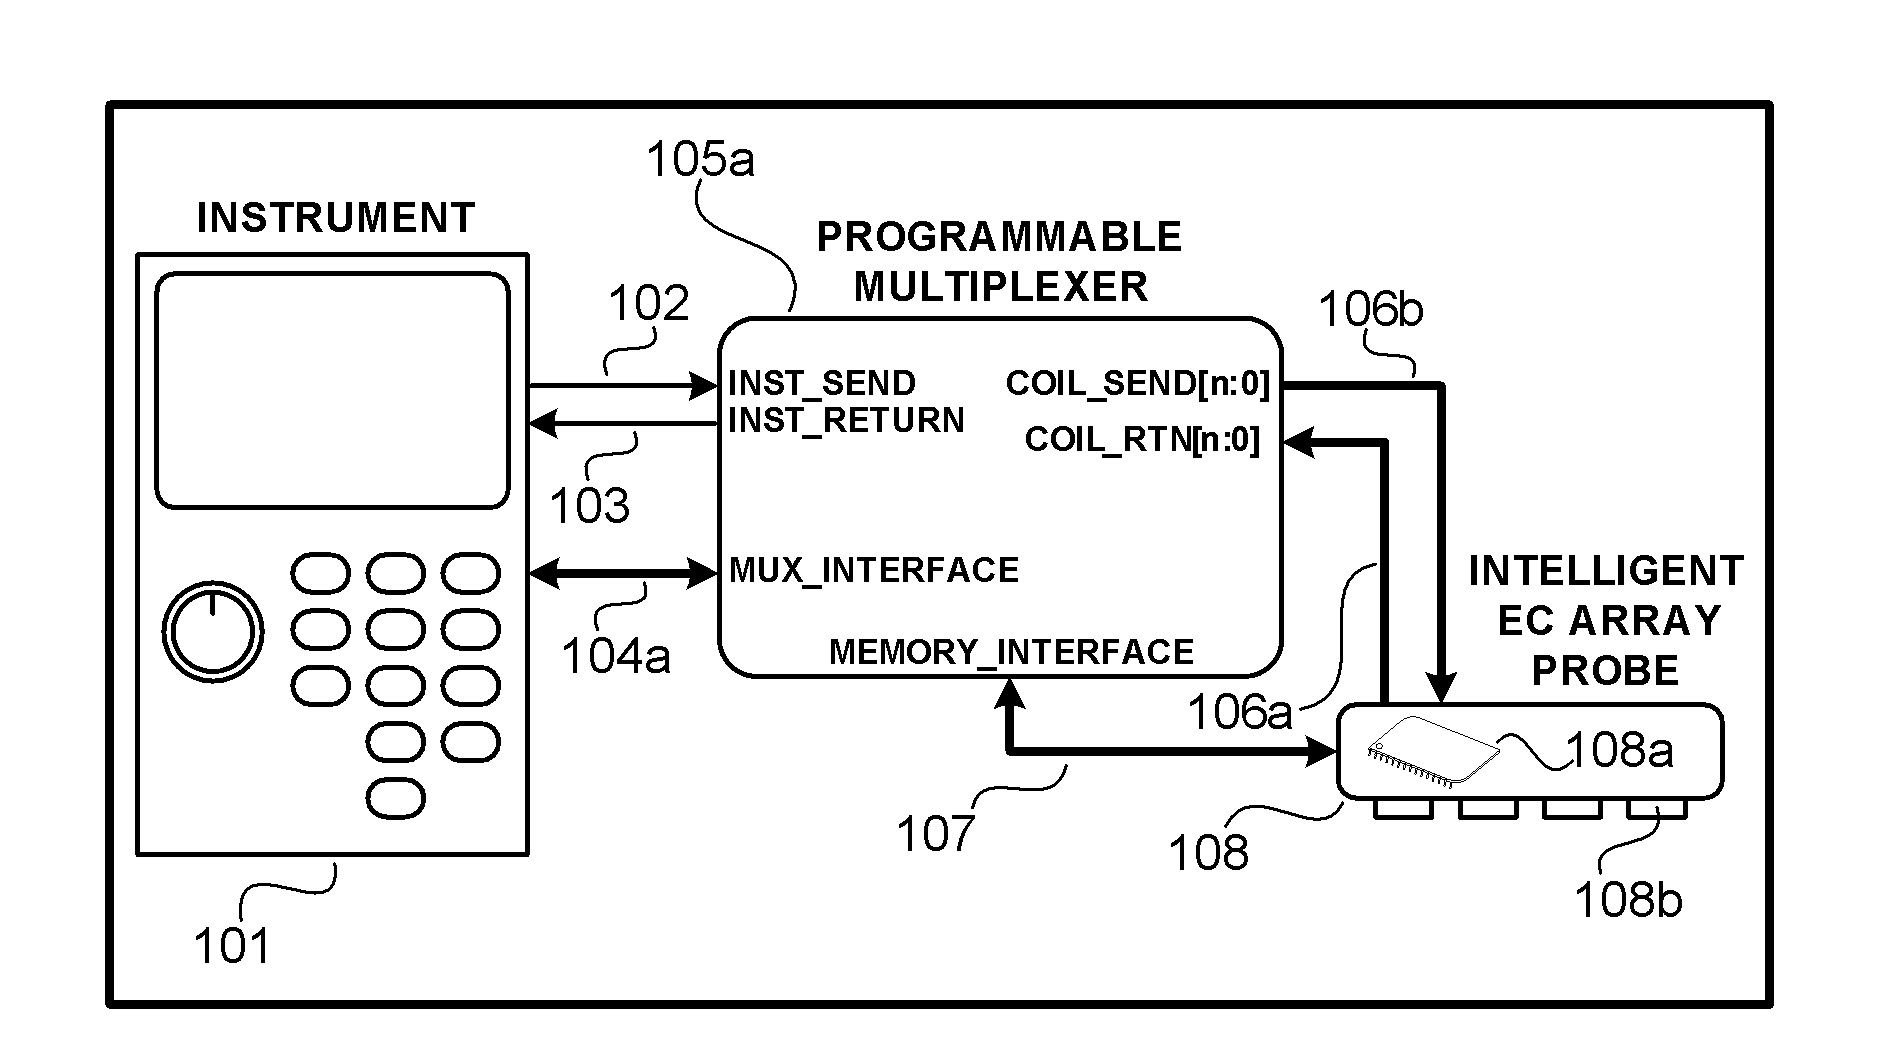 Intelligent eddy current array probe with embedded firing sequence memory